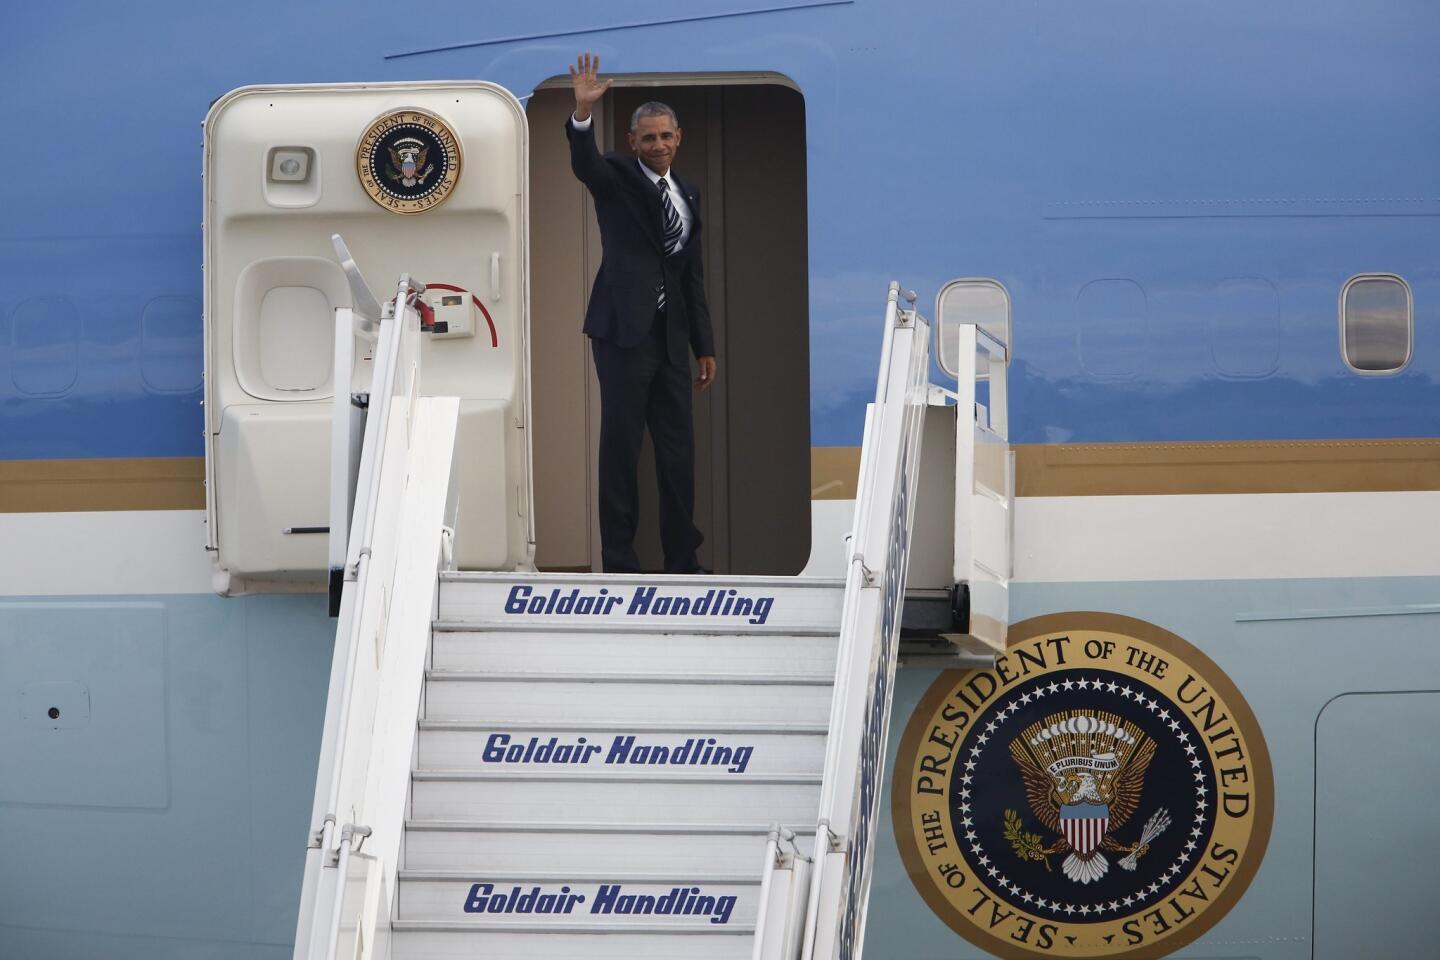 President Barack Obama boards Air Force One, ending his two-day visit to Athens at the Athens International Airport in Greece on Nov. 16, 2016.